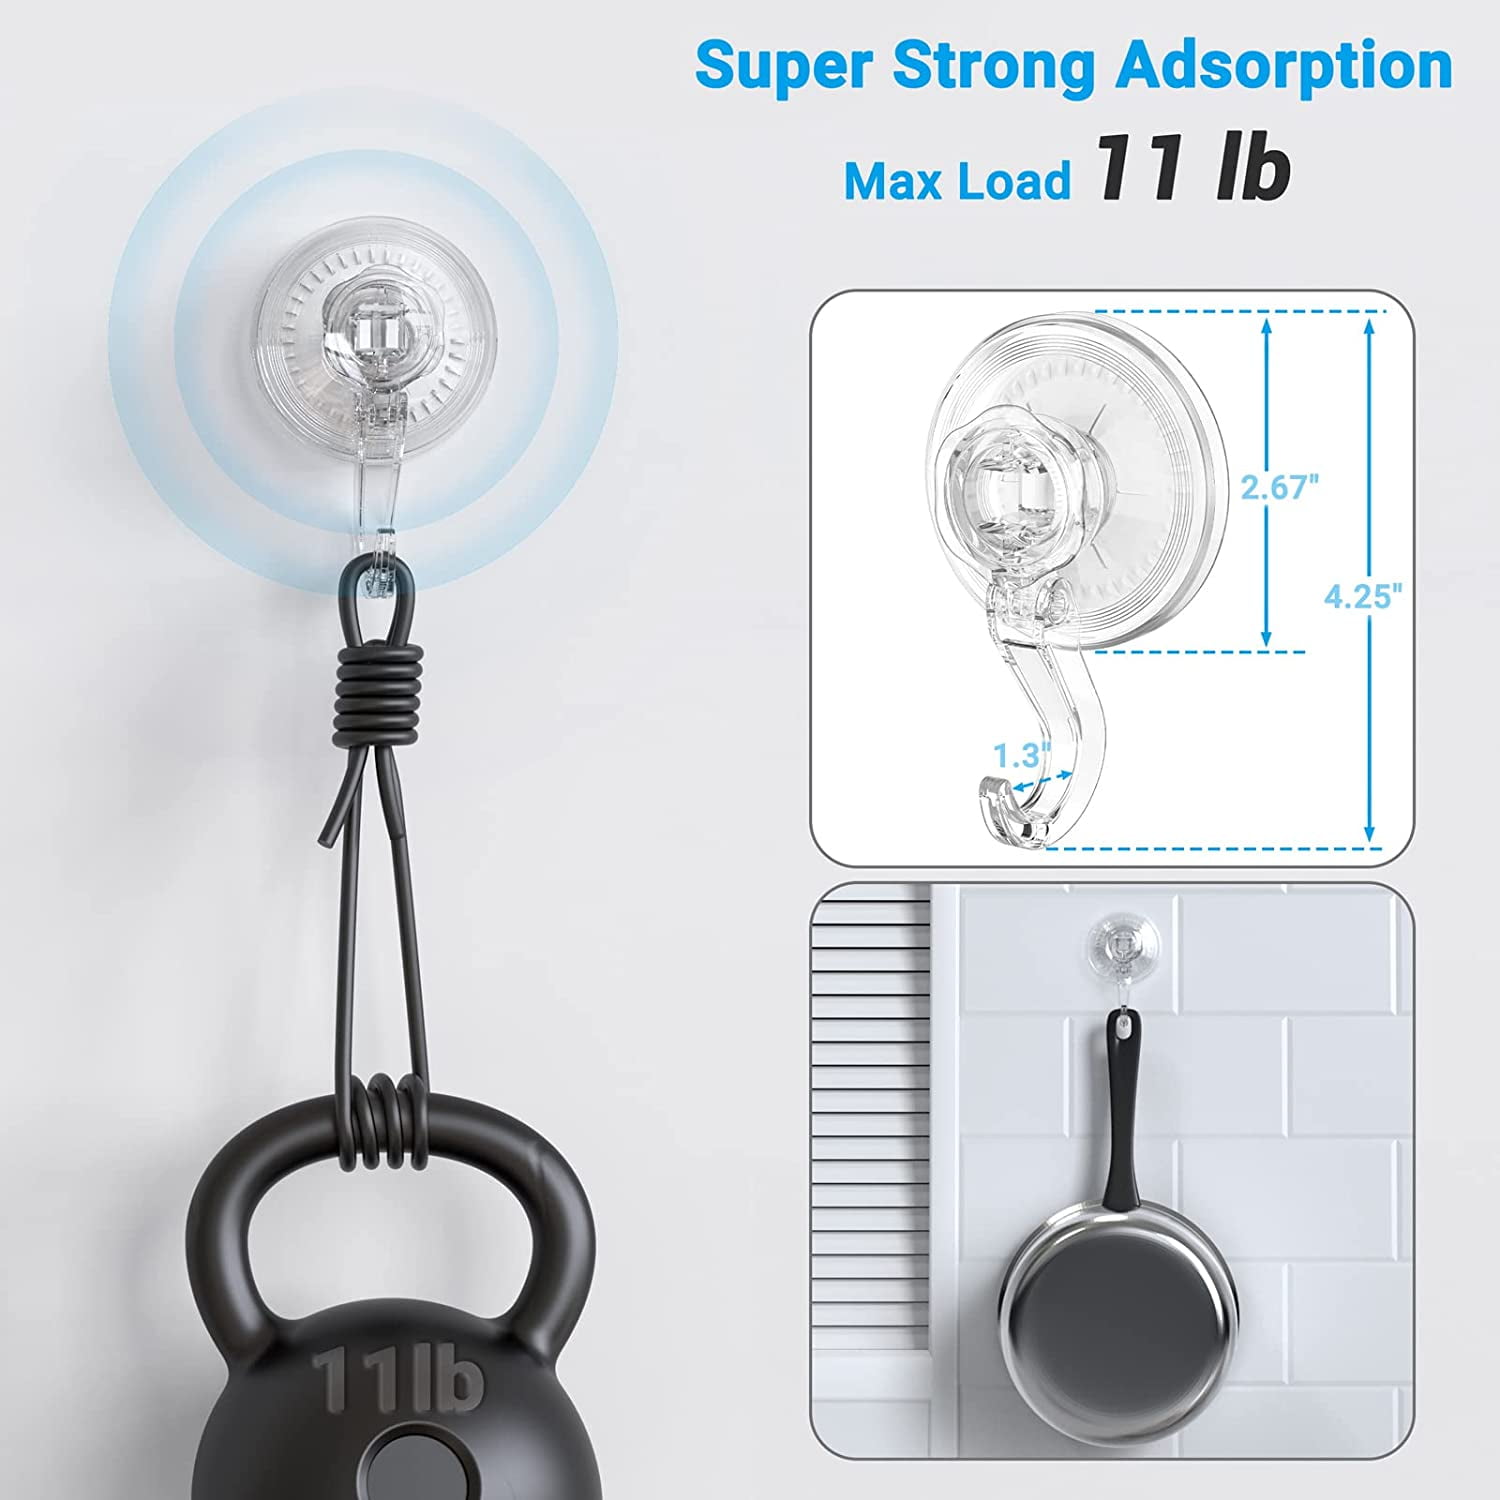 LUXEAR Suction Hooks Powerful Vacuum Suction Cup Hooks- Heavy Duty for  Shower, Waterproof Suction Hanger for Bathroom Kitchen Towel, Robe, Loofah